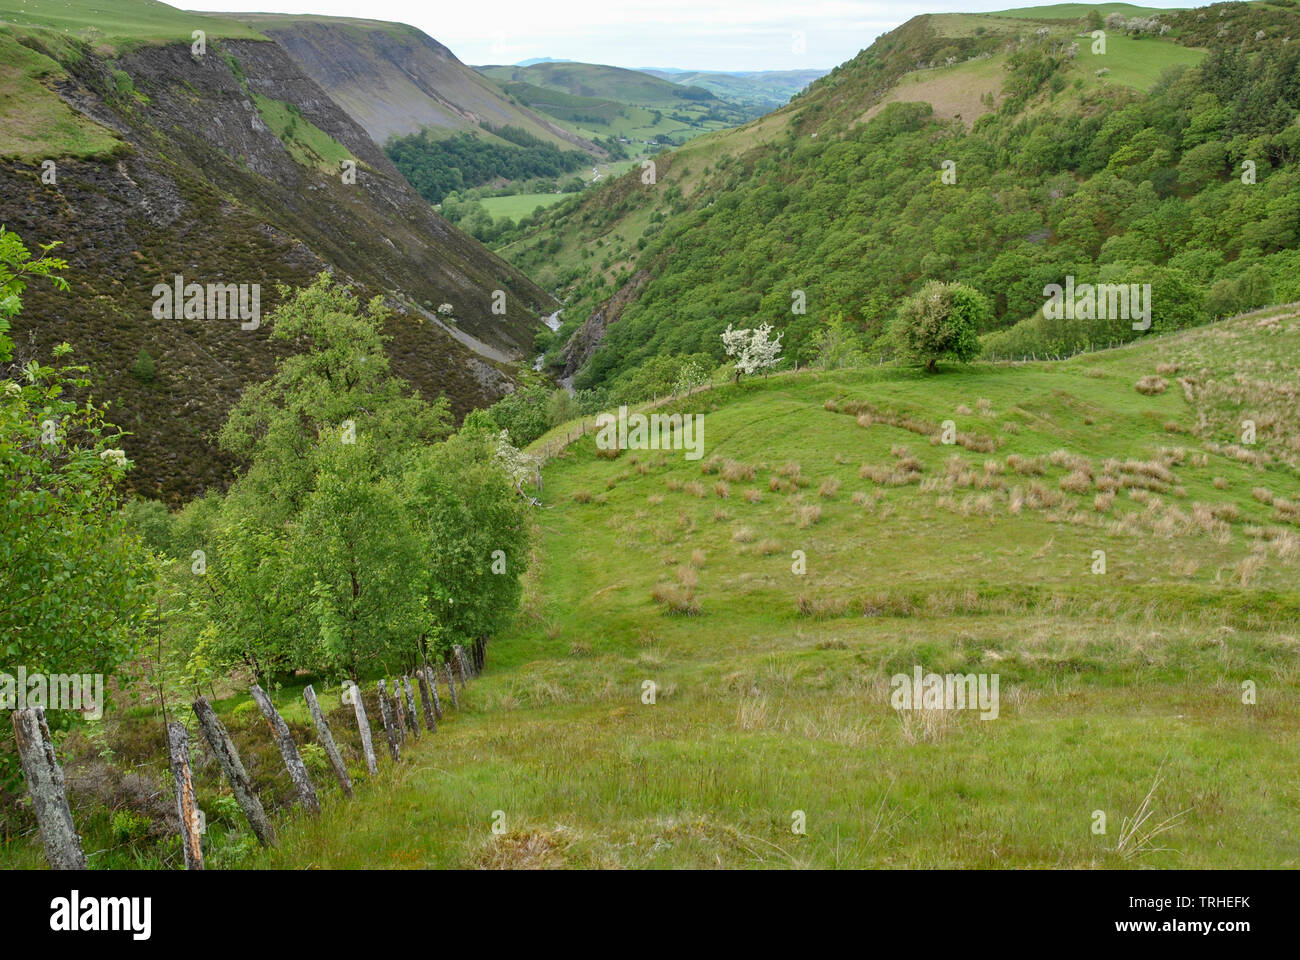 A view looking down Dylife Gorge in Wales showing v shaped valley with river Stock Photo